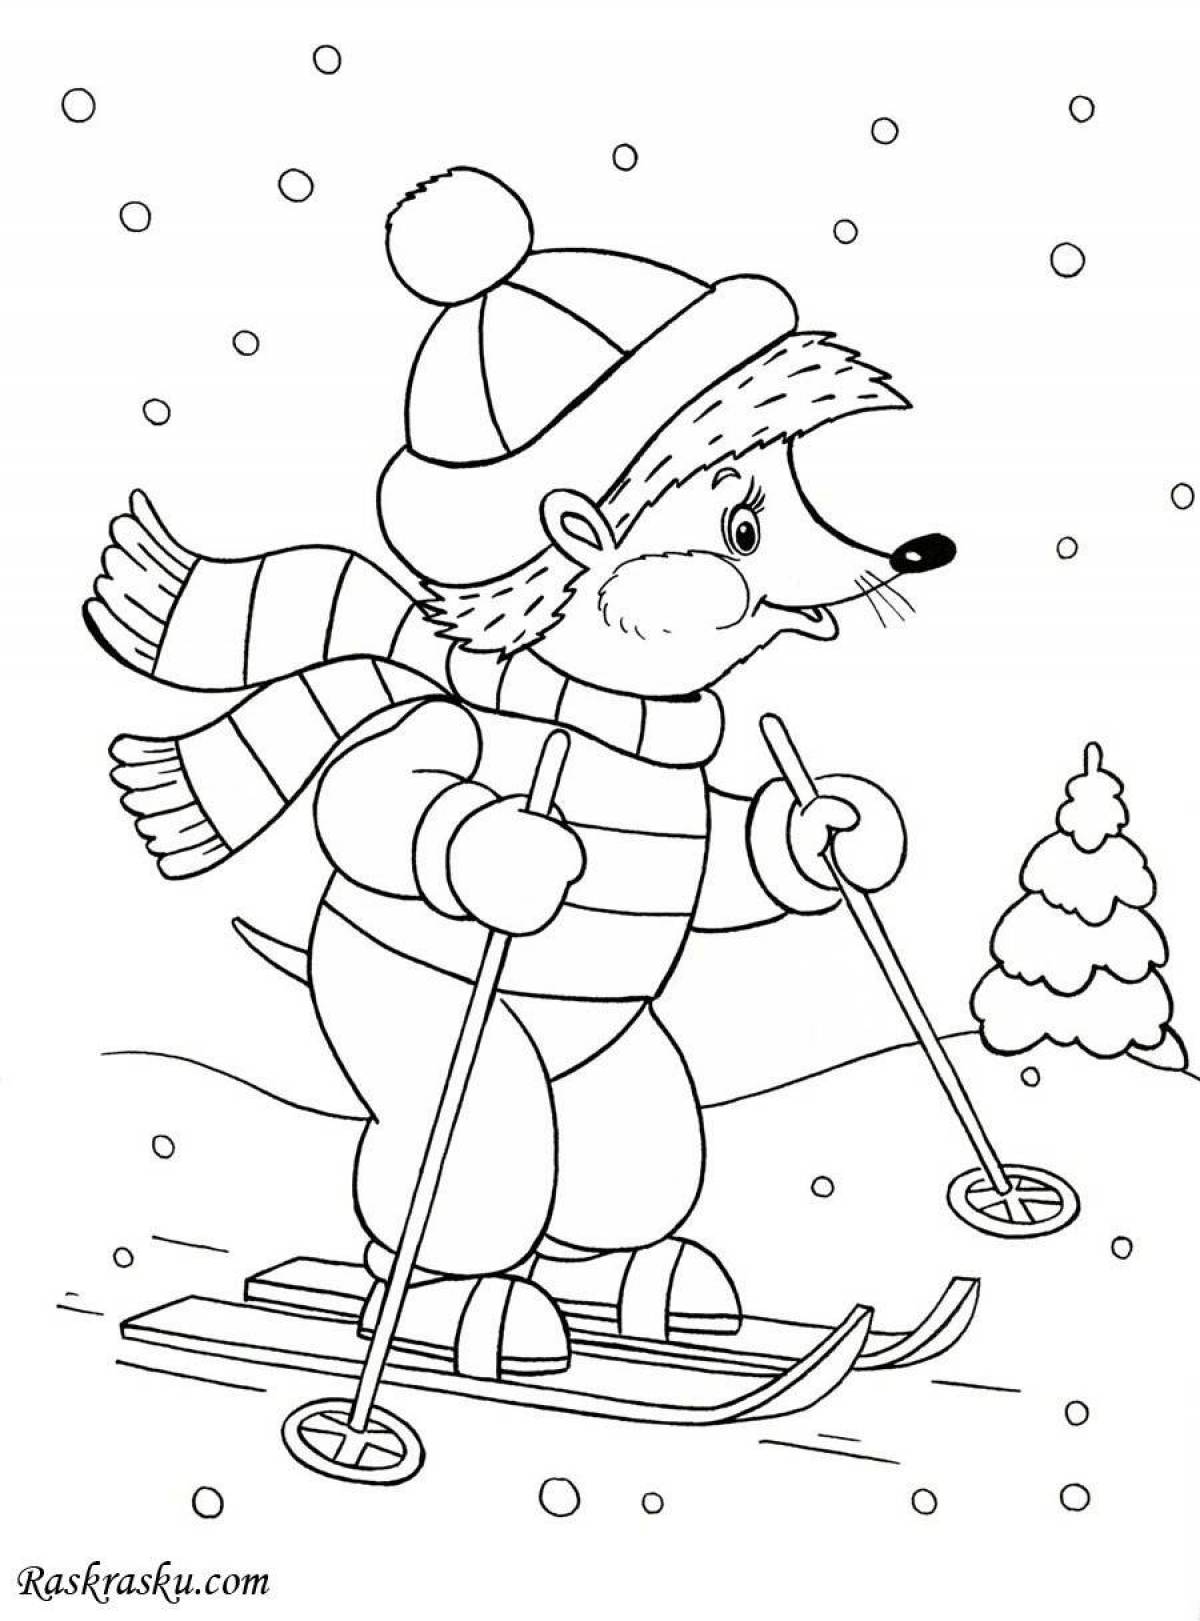 Whimsical winter coloring for kids